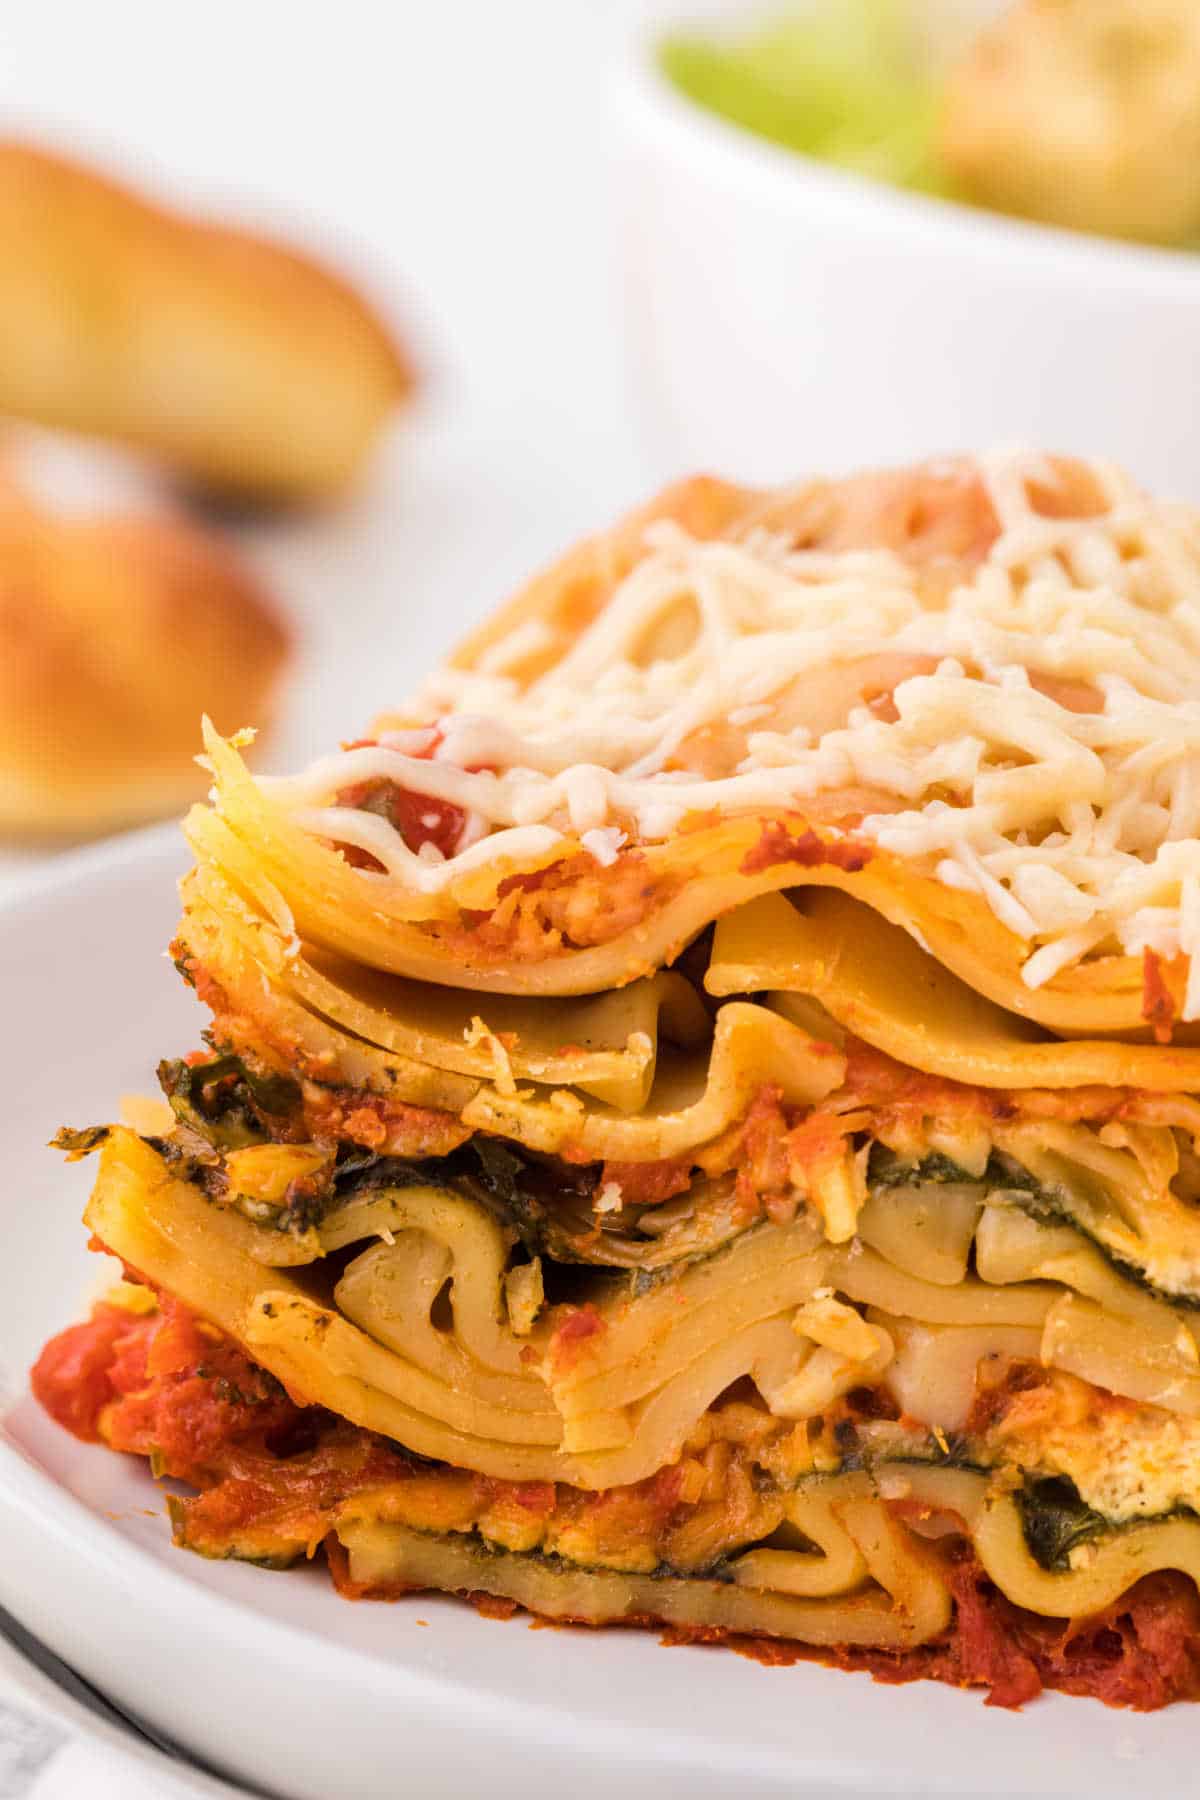 A piece of lasagna on a plate showing the layers.